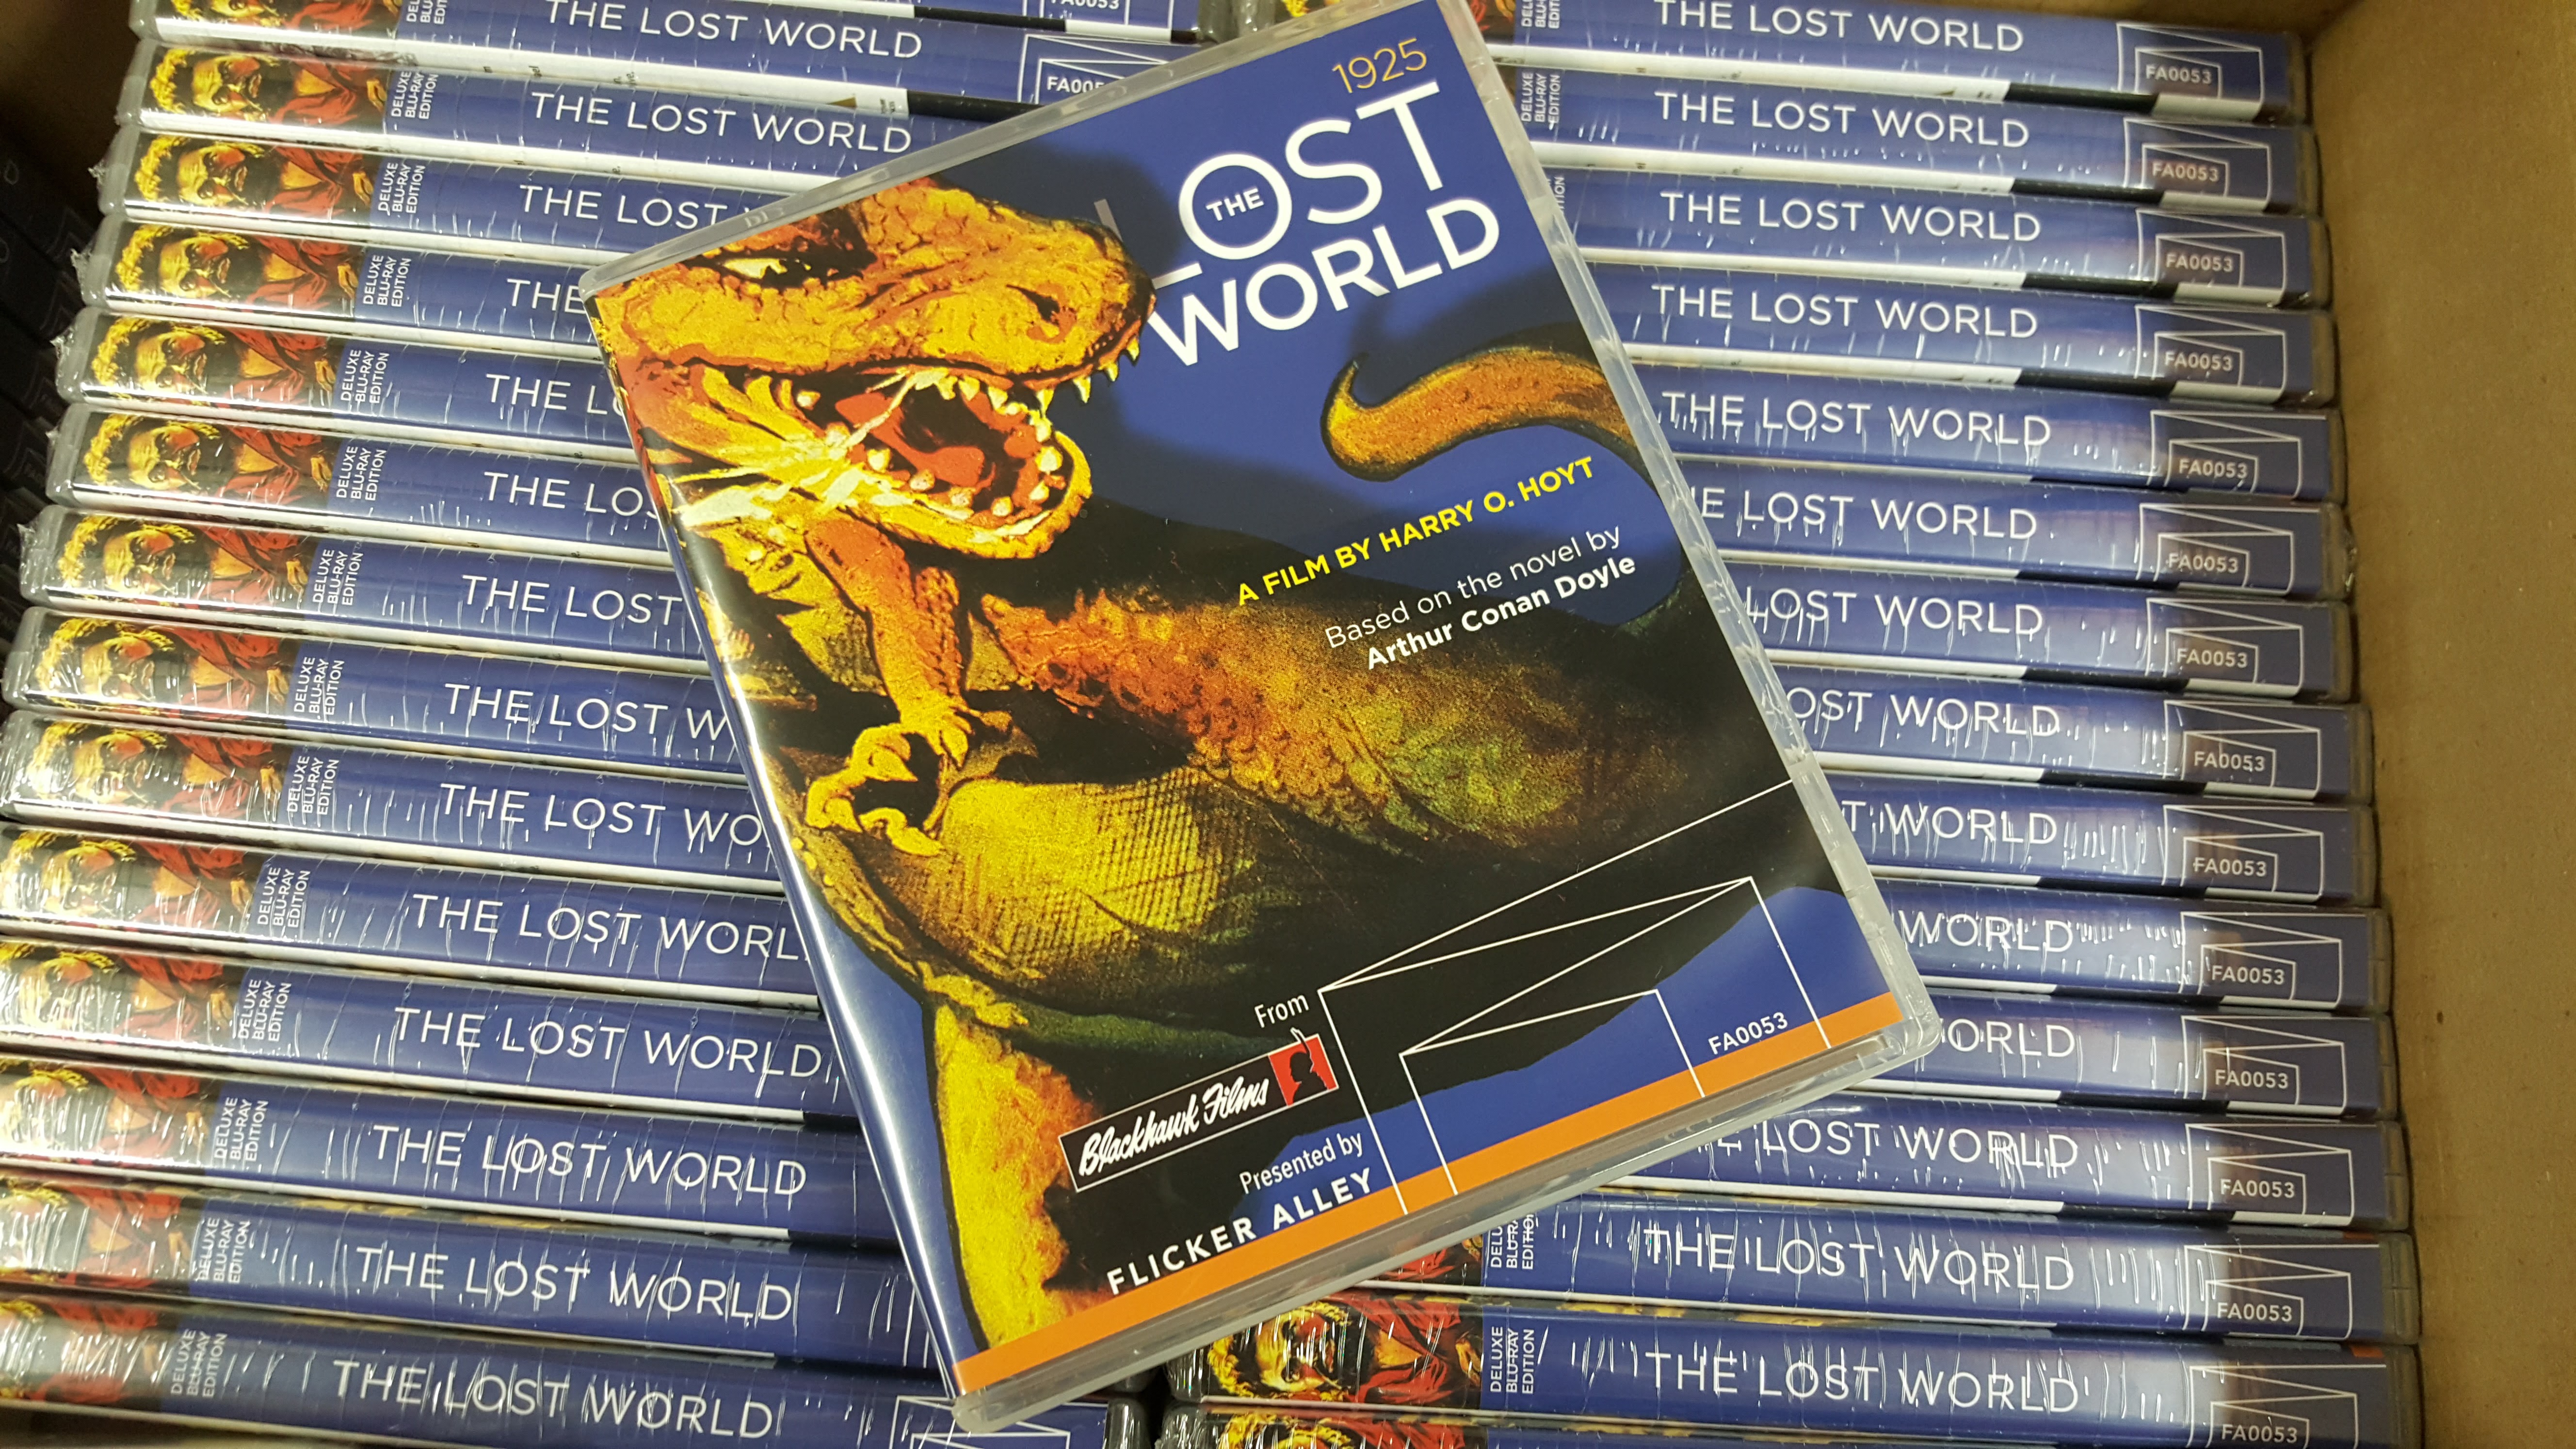 The Lost World Has Been Found!